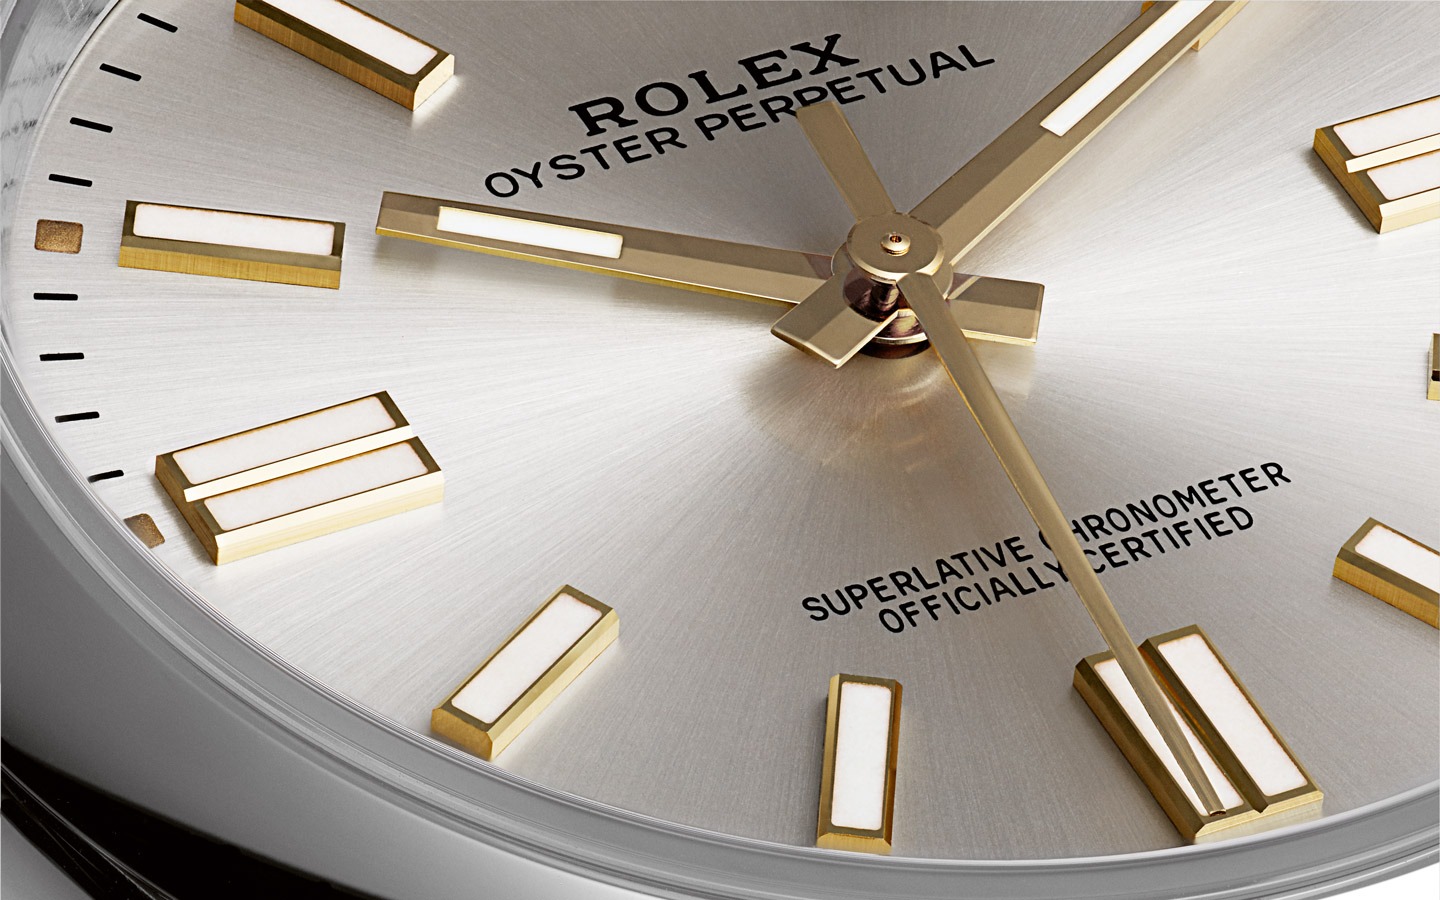 08 Oyster Perpetual The essence of the oyster two column 02 desktop 1440x900